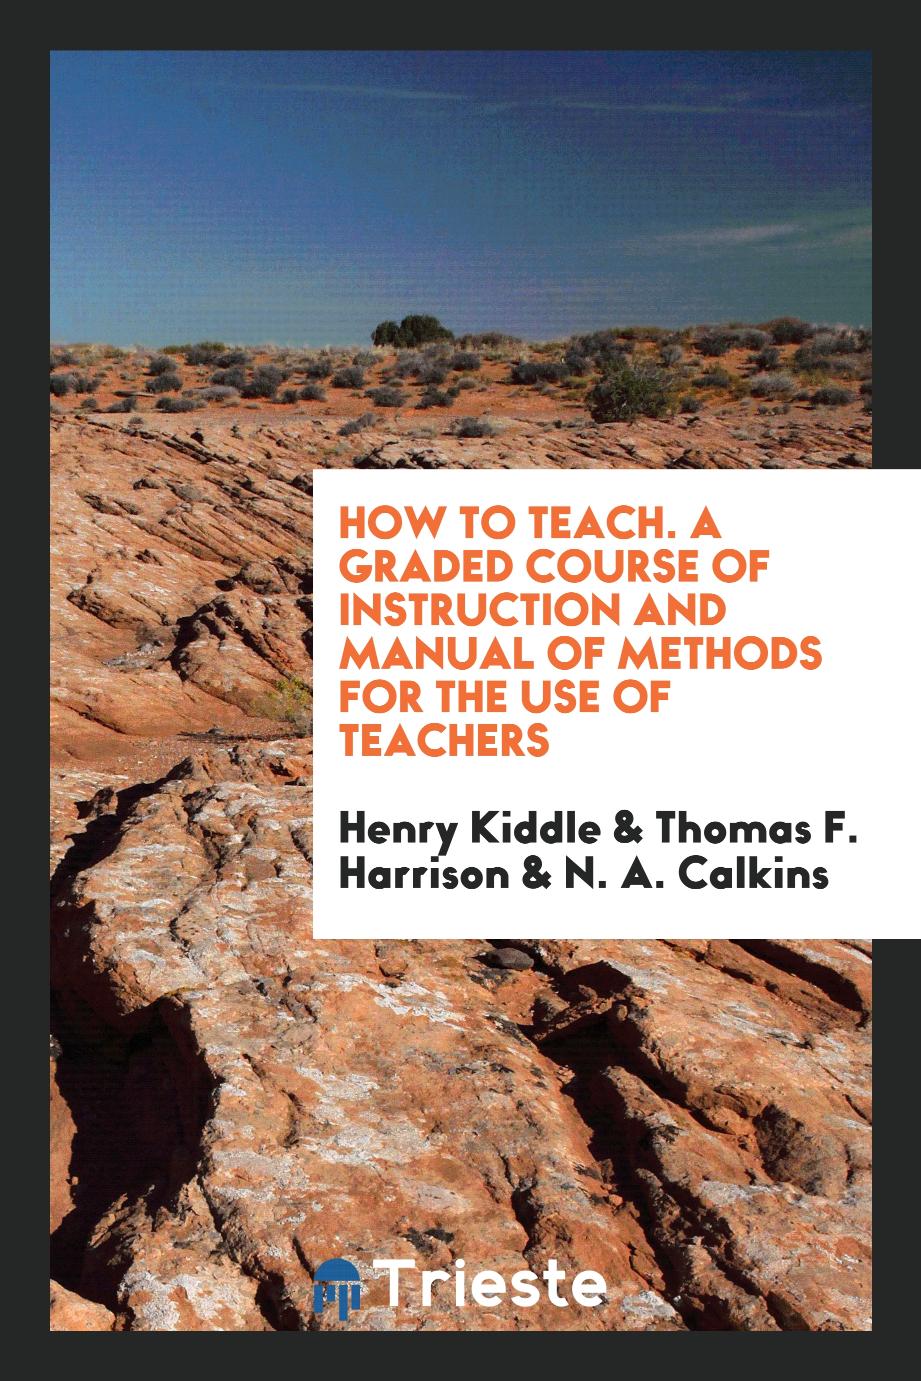 How to teach. A graded course of instruction and manual of methods for the use of teachers